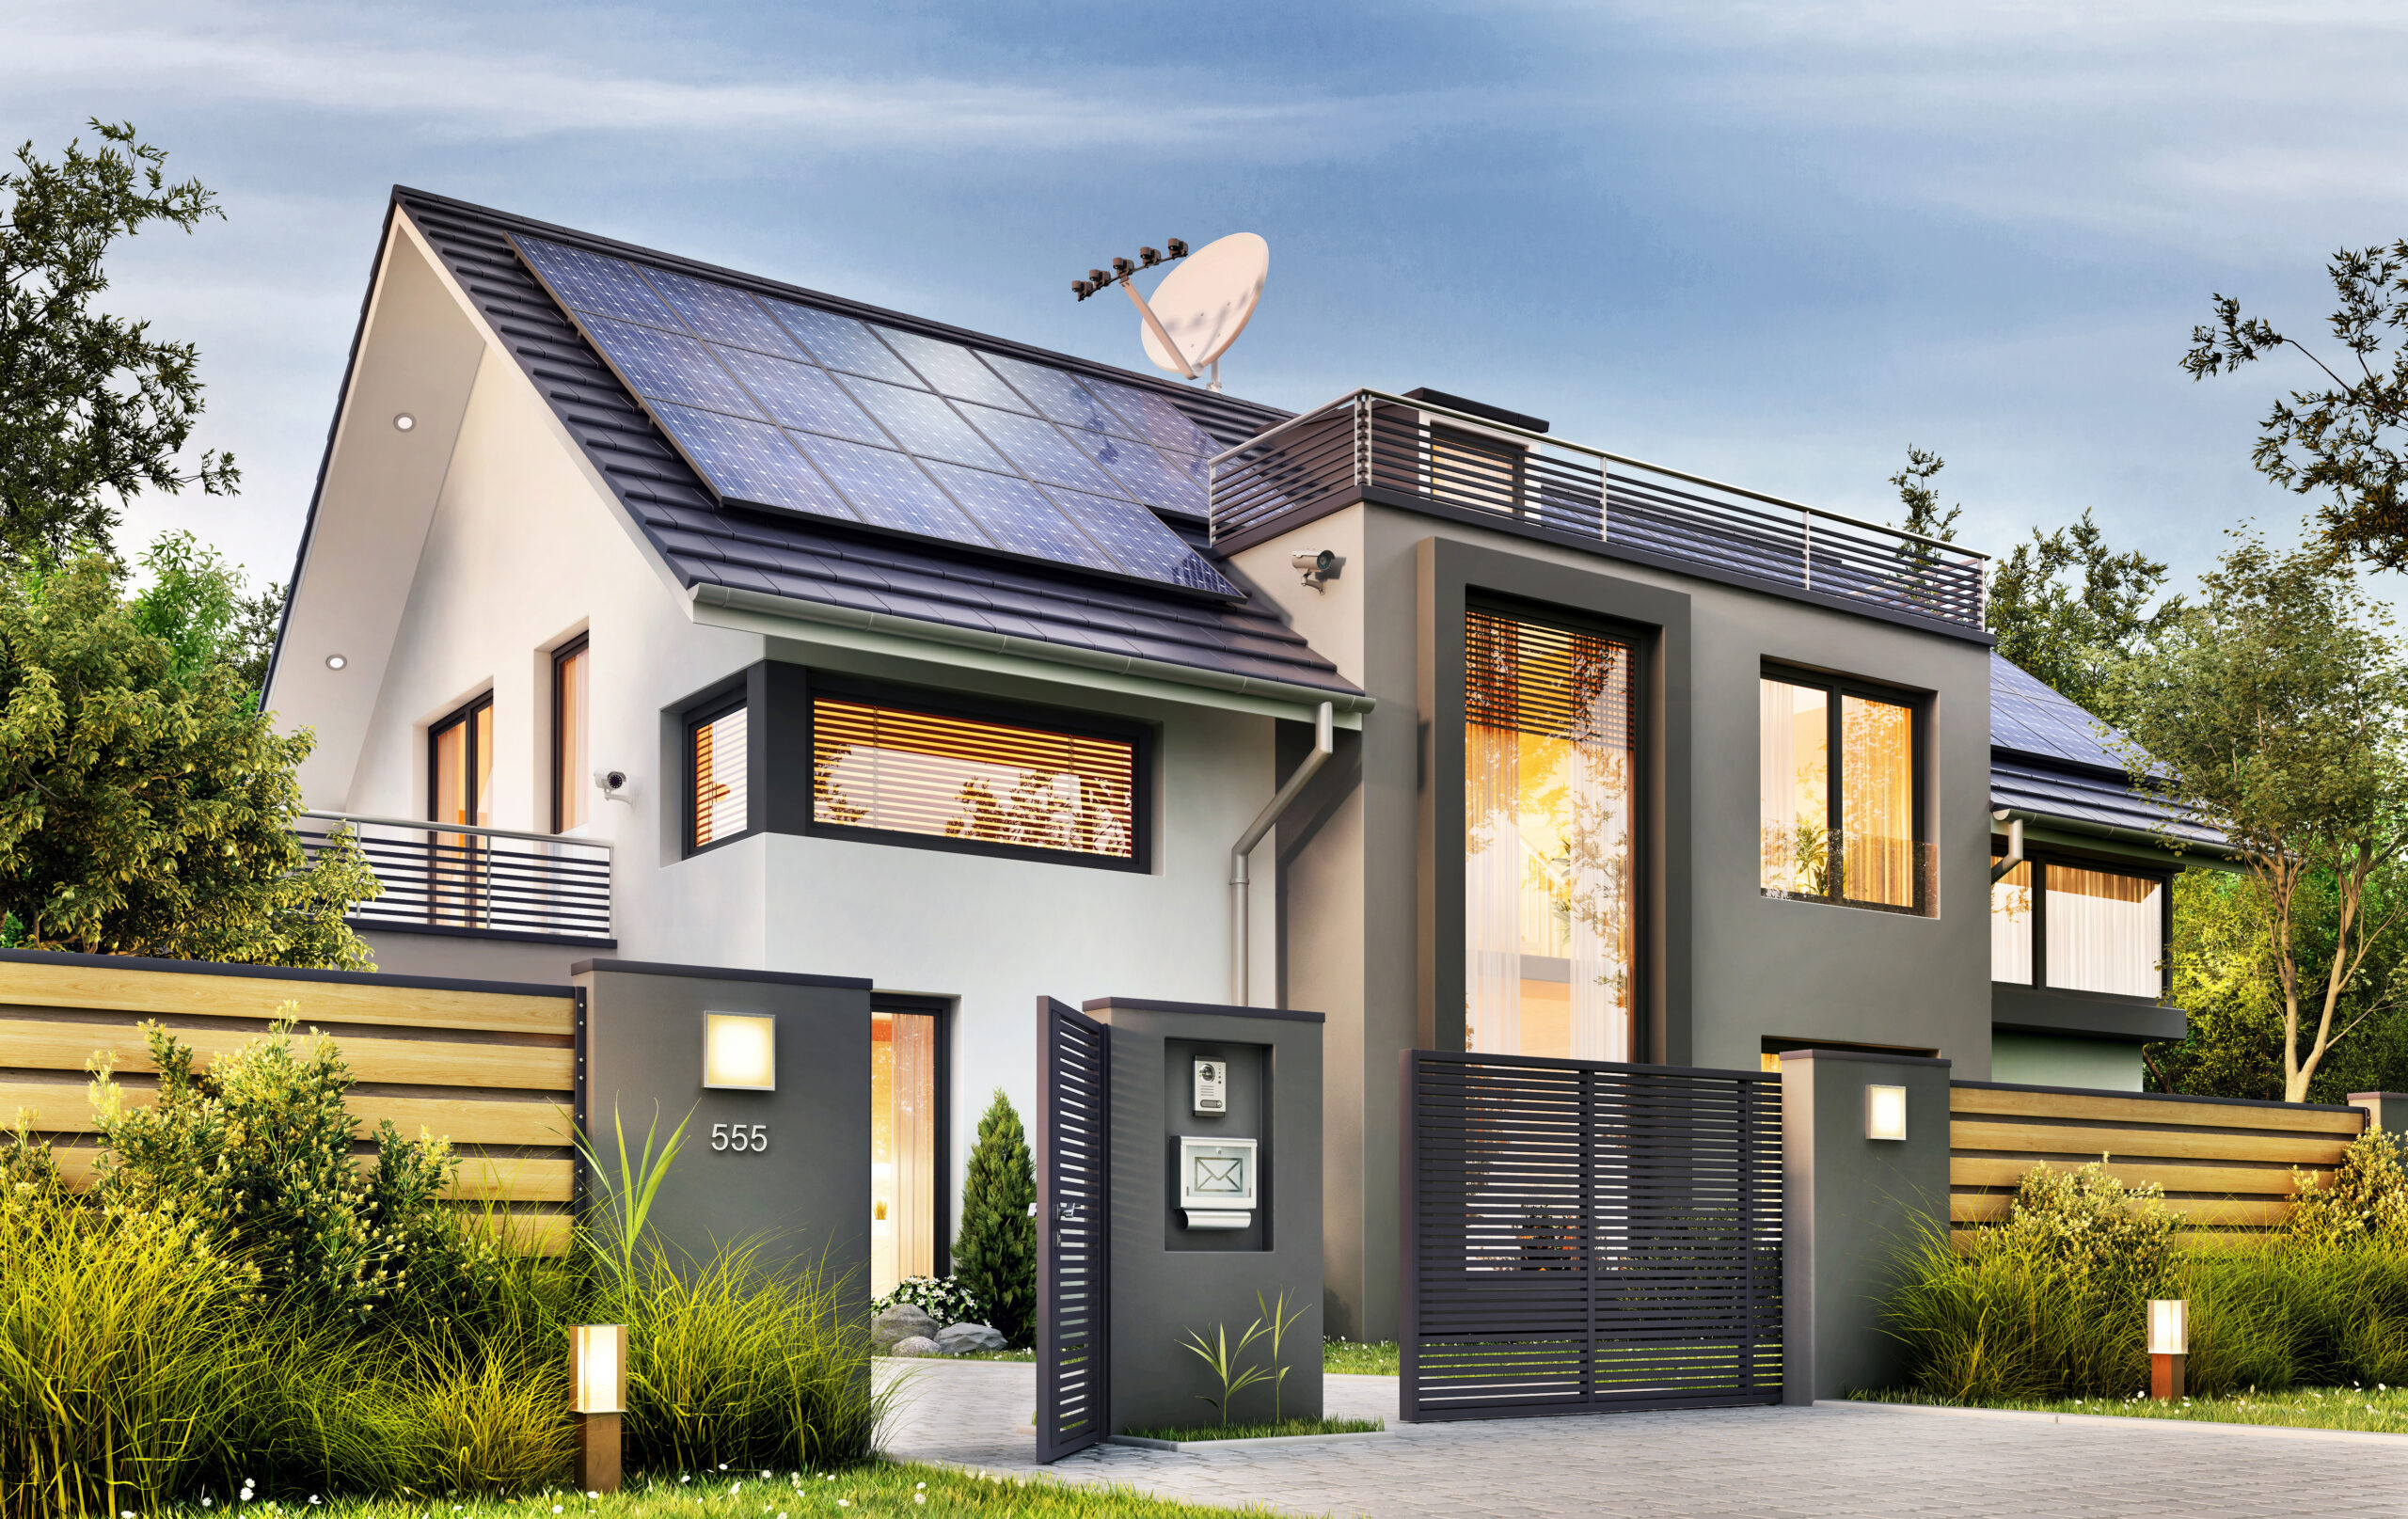 Beautiful modern house with garden and solar panels on the gable roof